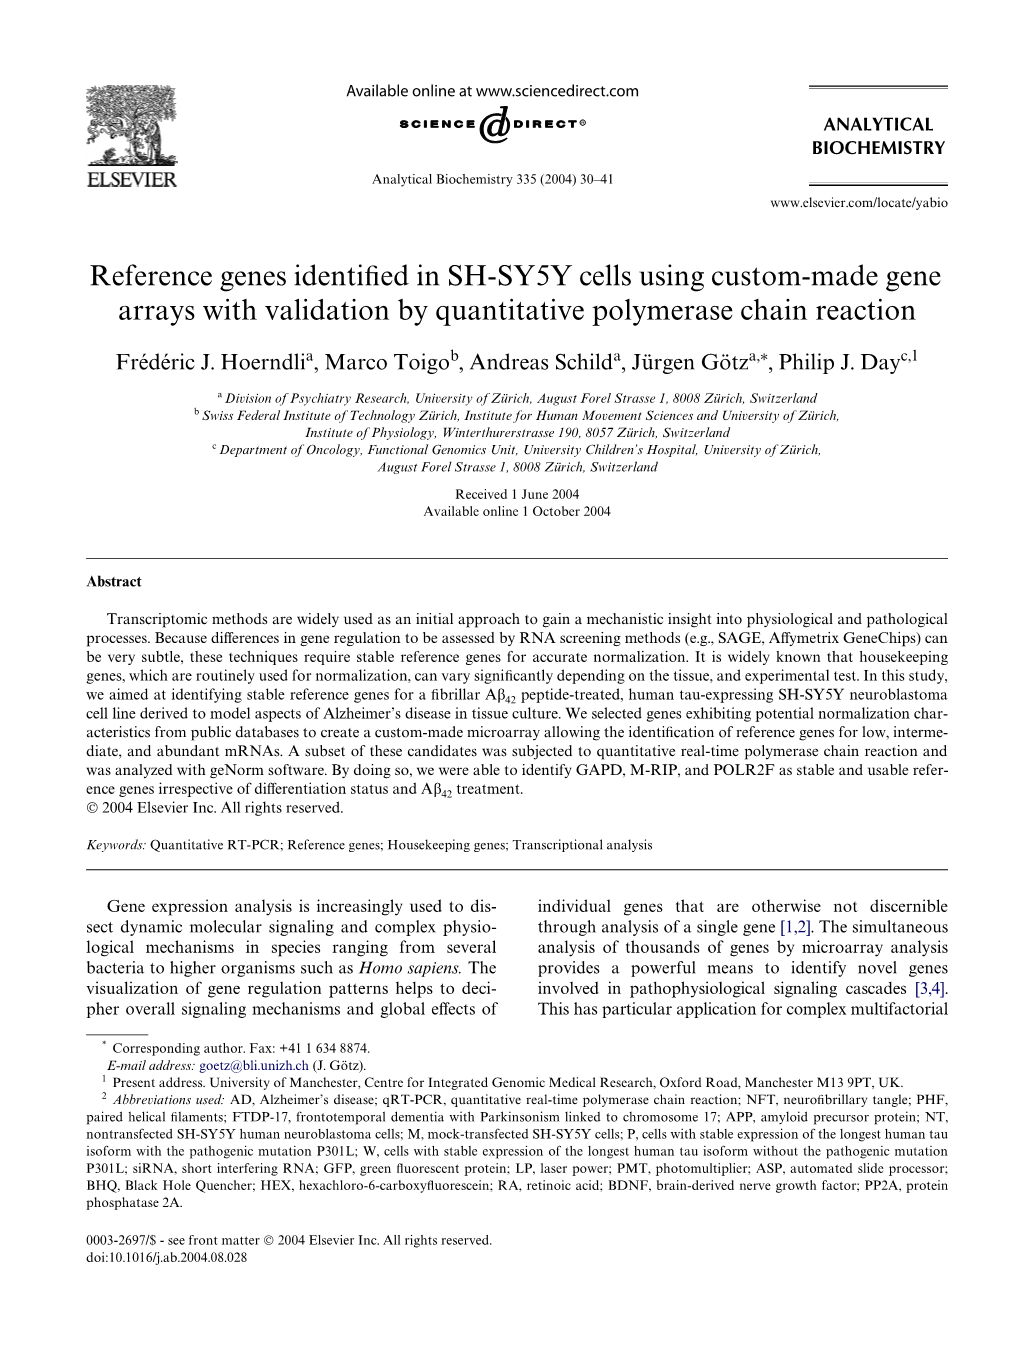 Reference Genes Identified in SH-SY5Y Cells Using Custom-Made Gene Arrays with Validation by Quantitative Polymerase Chain React